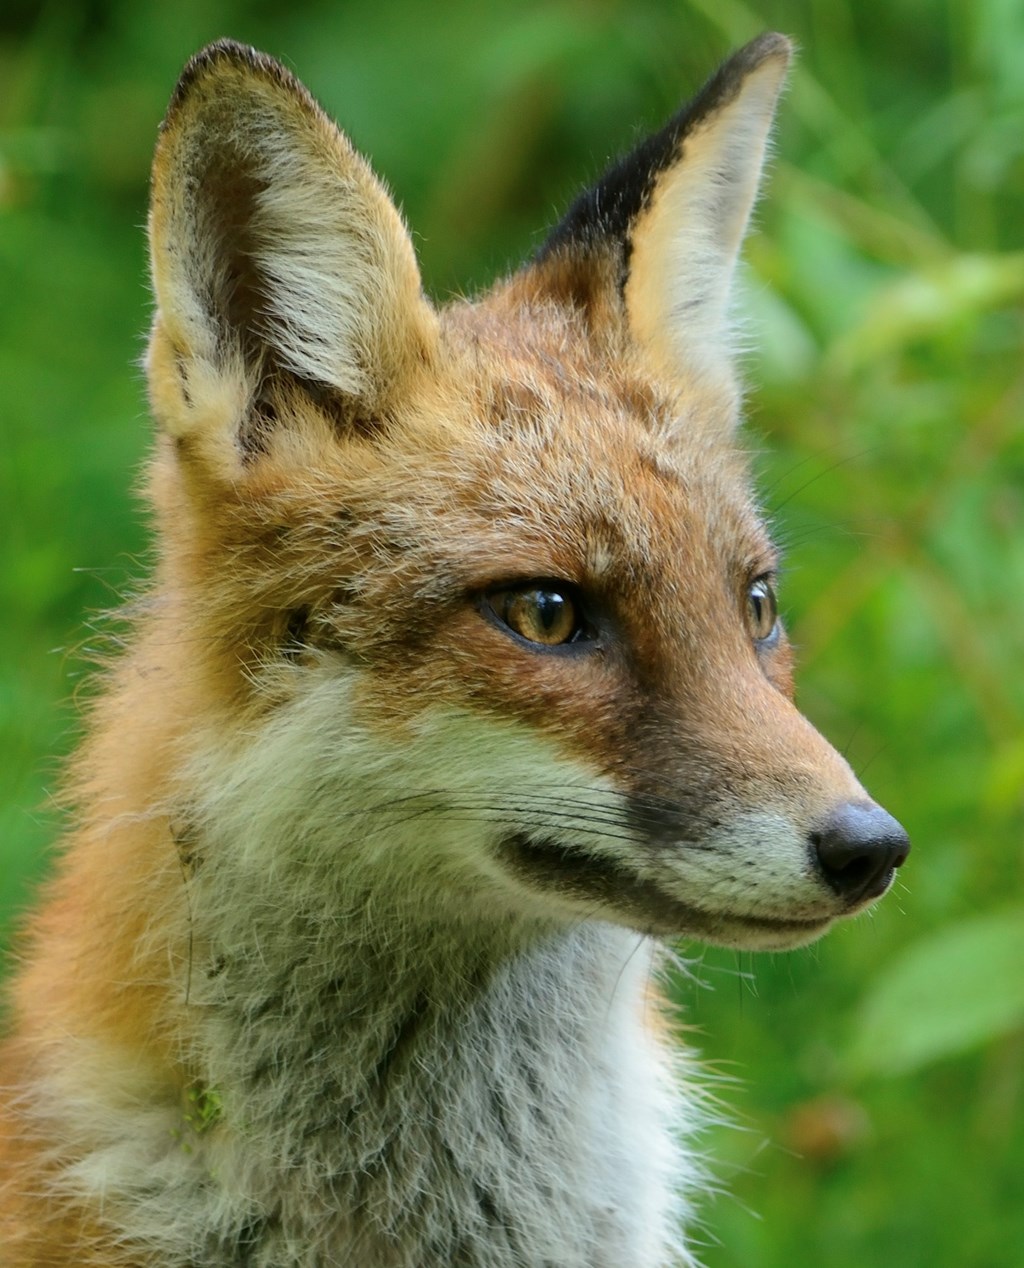 A Close-up of a Red Fox Face